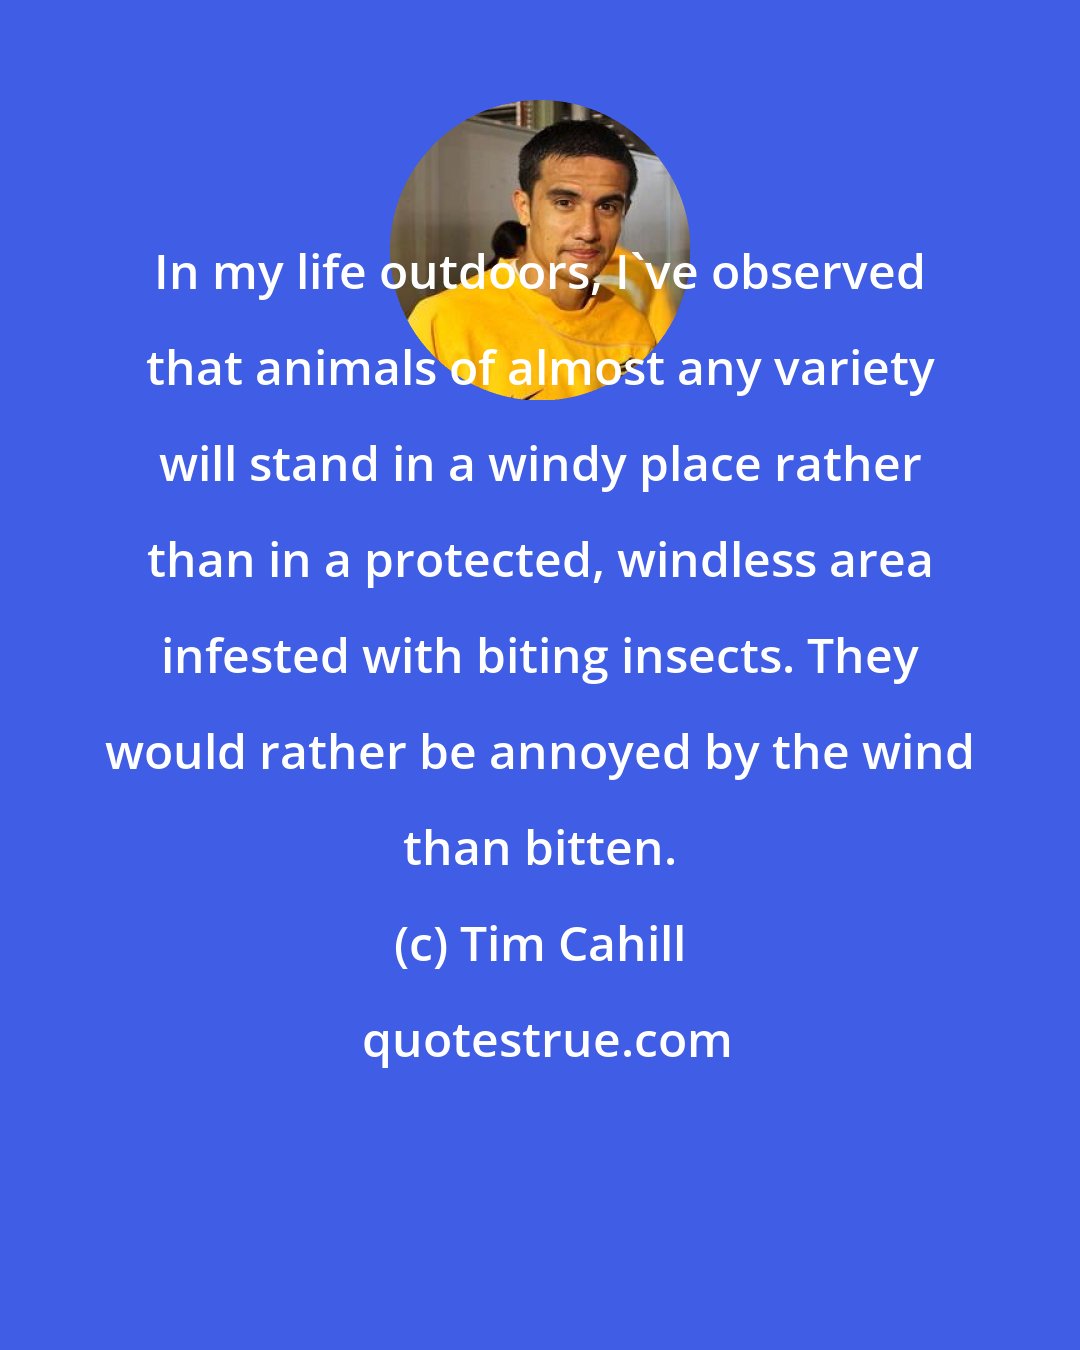 Tim Cahill: In my life outdoors, I've observed that animals of almost any variety will stand in a windy place rather than in a protected, windless area infested with biting insects. They would rather be annoyed by the wind than bitten.